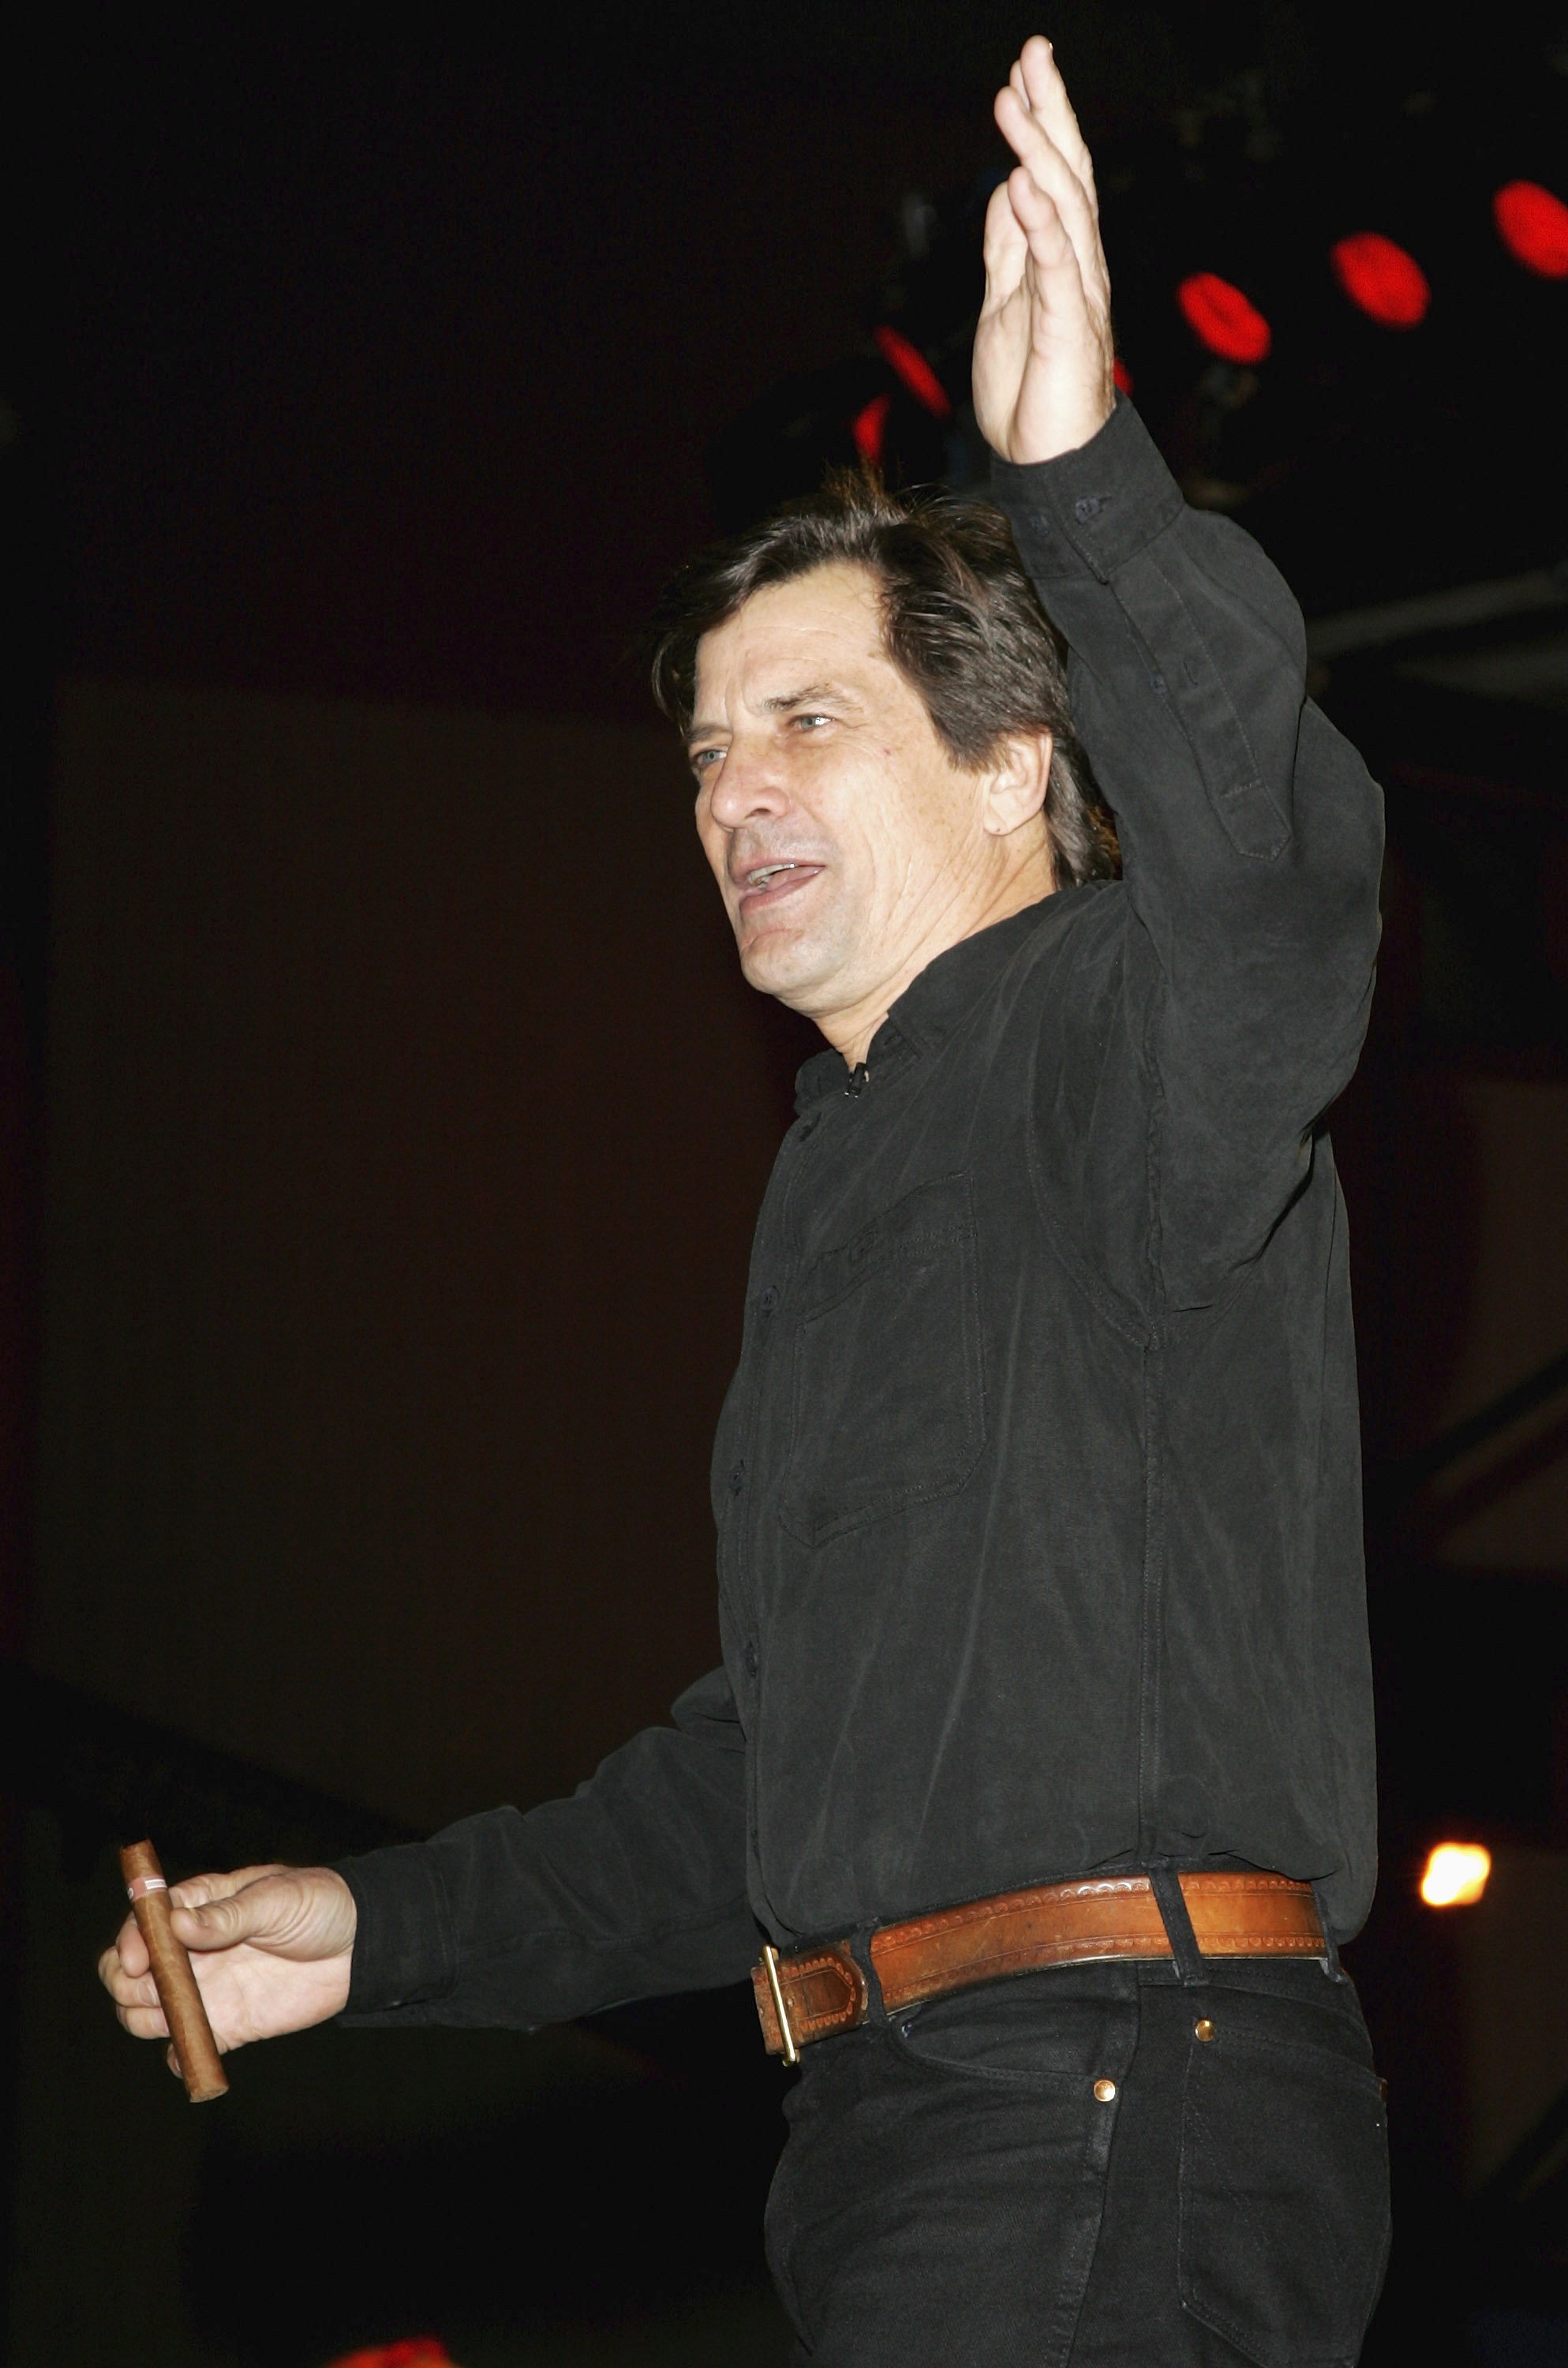 Dirk Benedict pictured waving his hand shortly after leaving the Celebrity Big Brother House on January 28, 2007 in London, England. | Photo: Getty Images